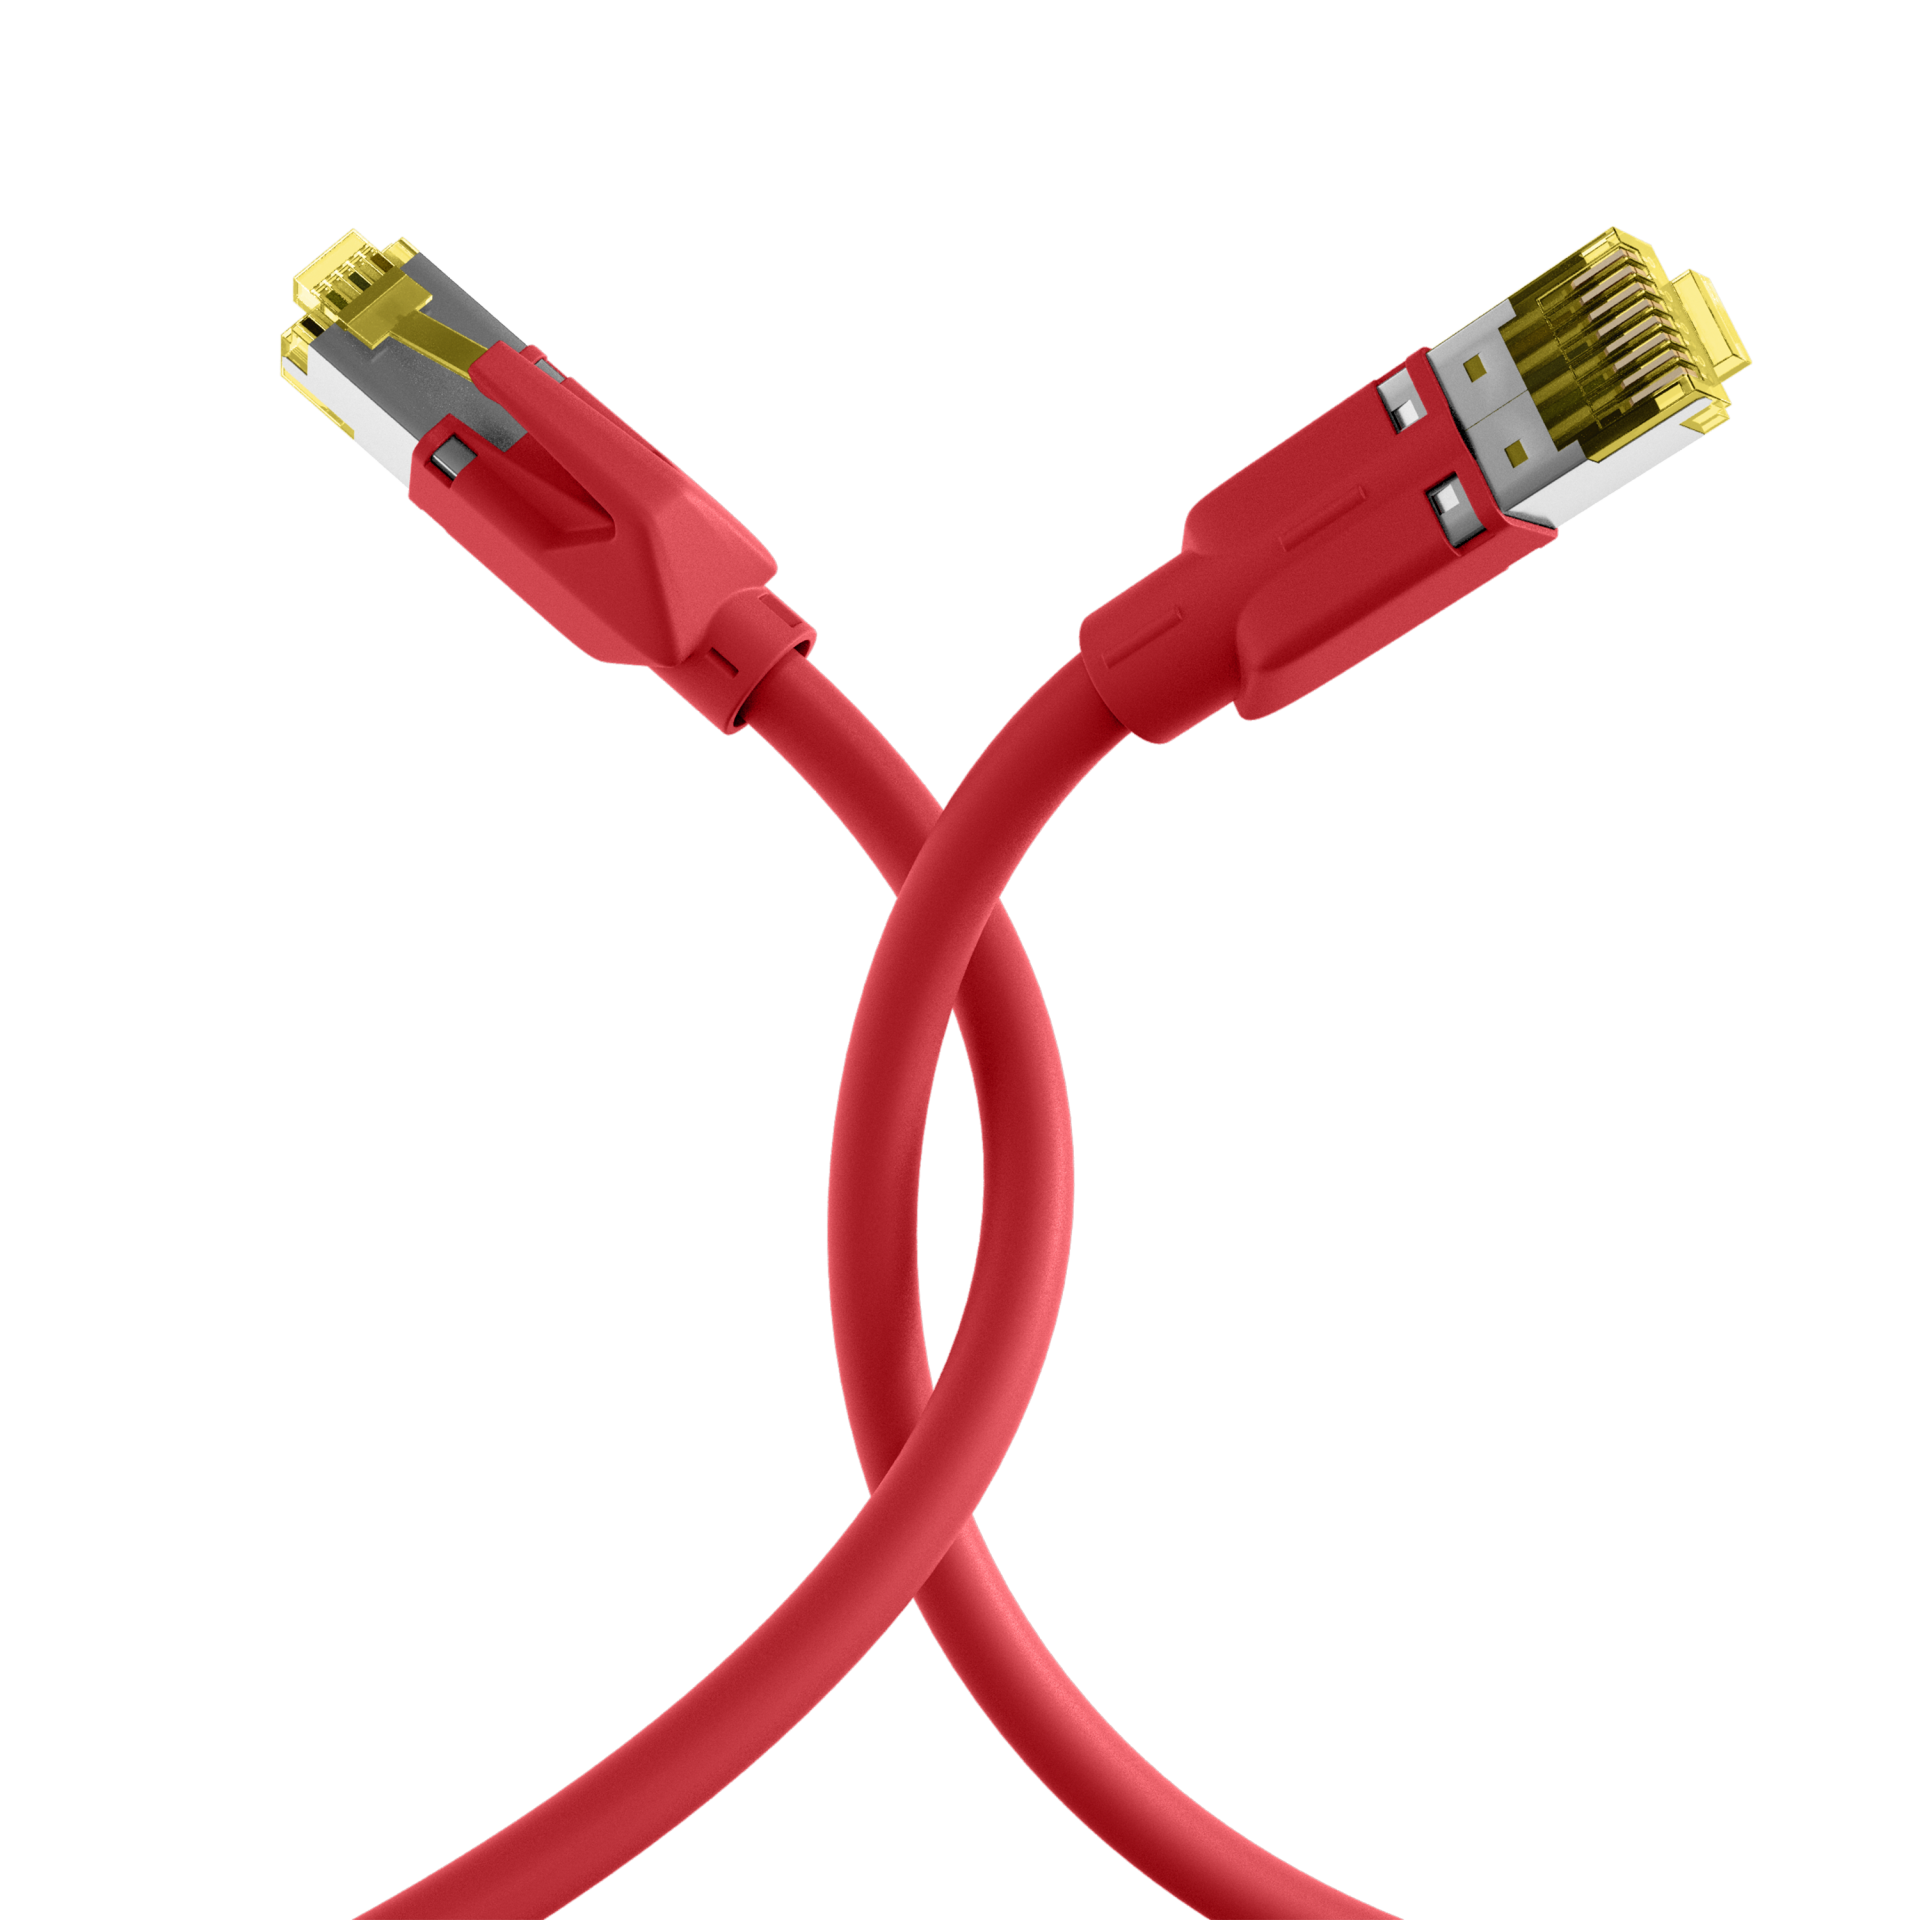 INFRALAN® RJ45 patch cord S/FTP, Cat.6A, TM31, UC900, 20m, red